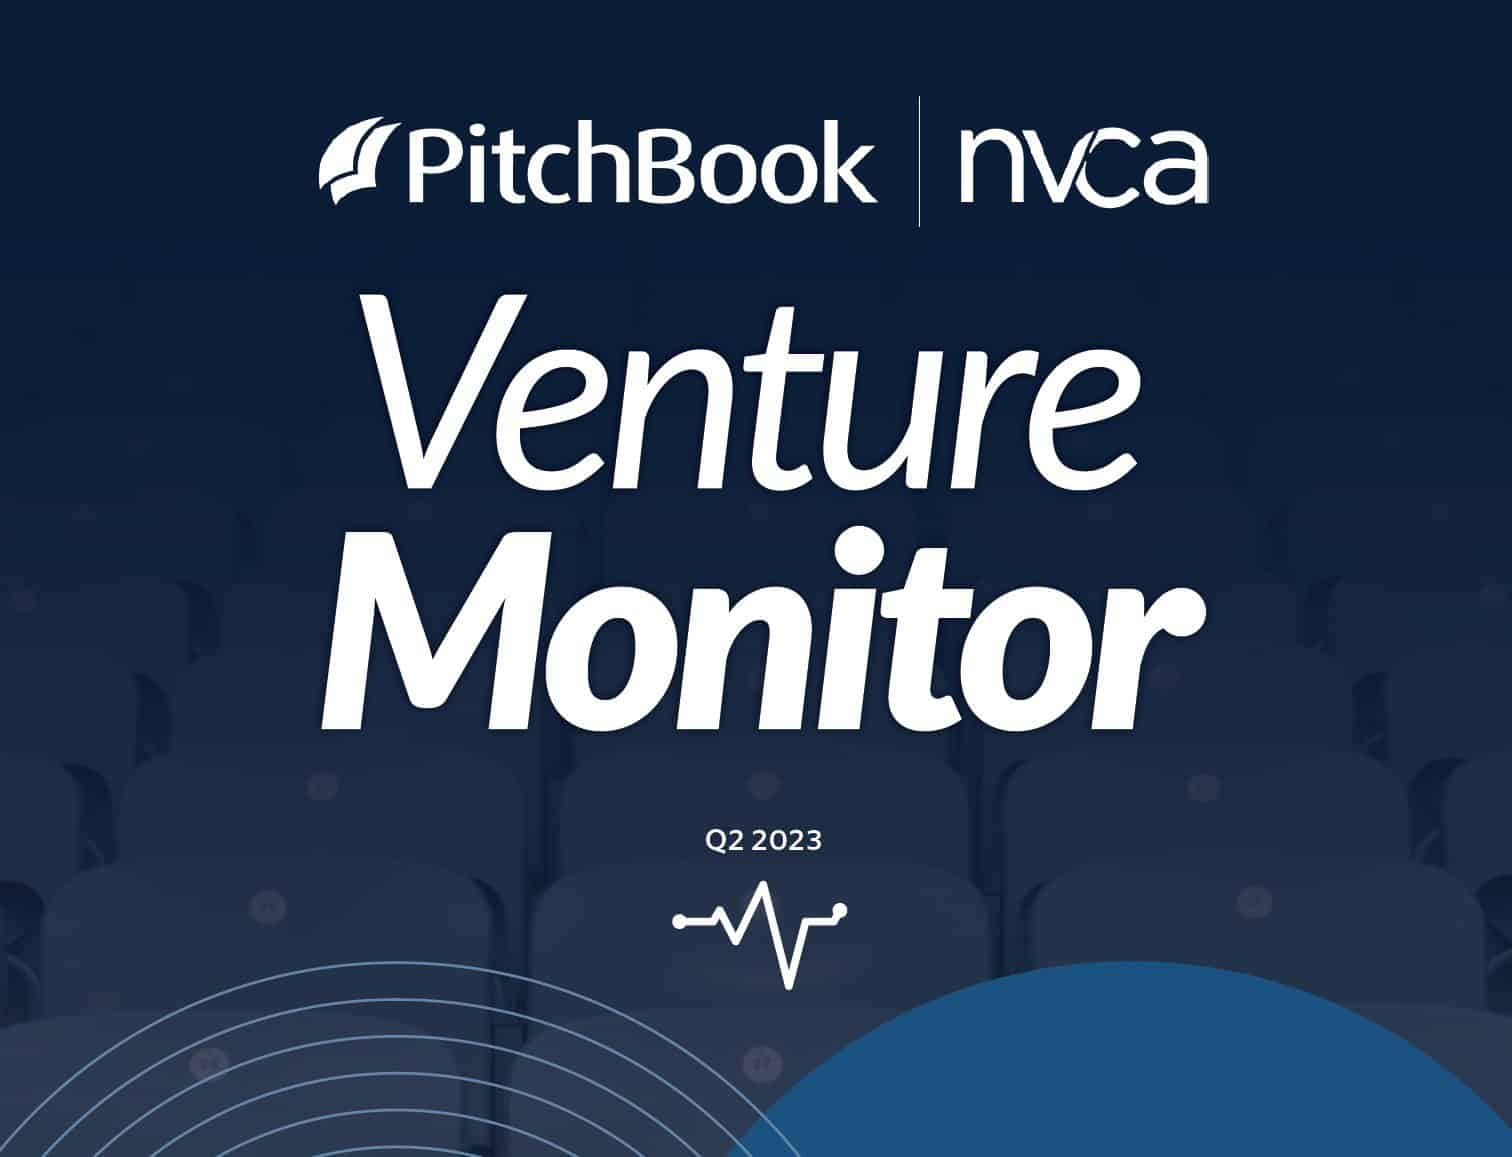 Pitchbook nvca report cover